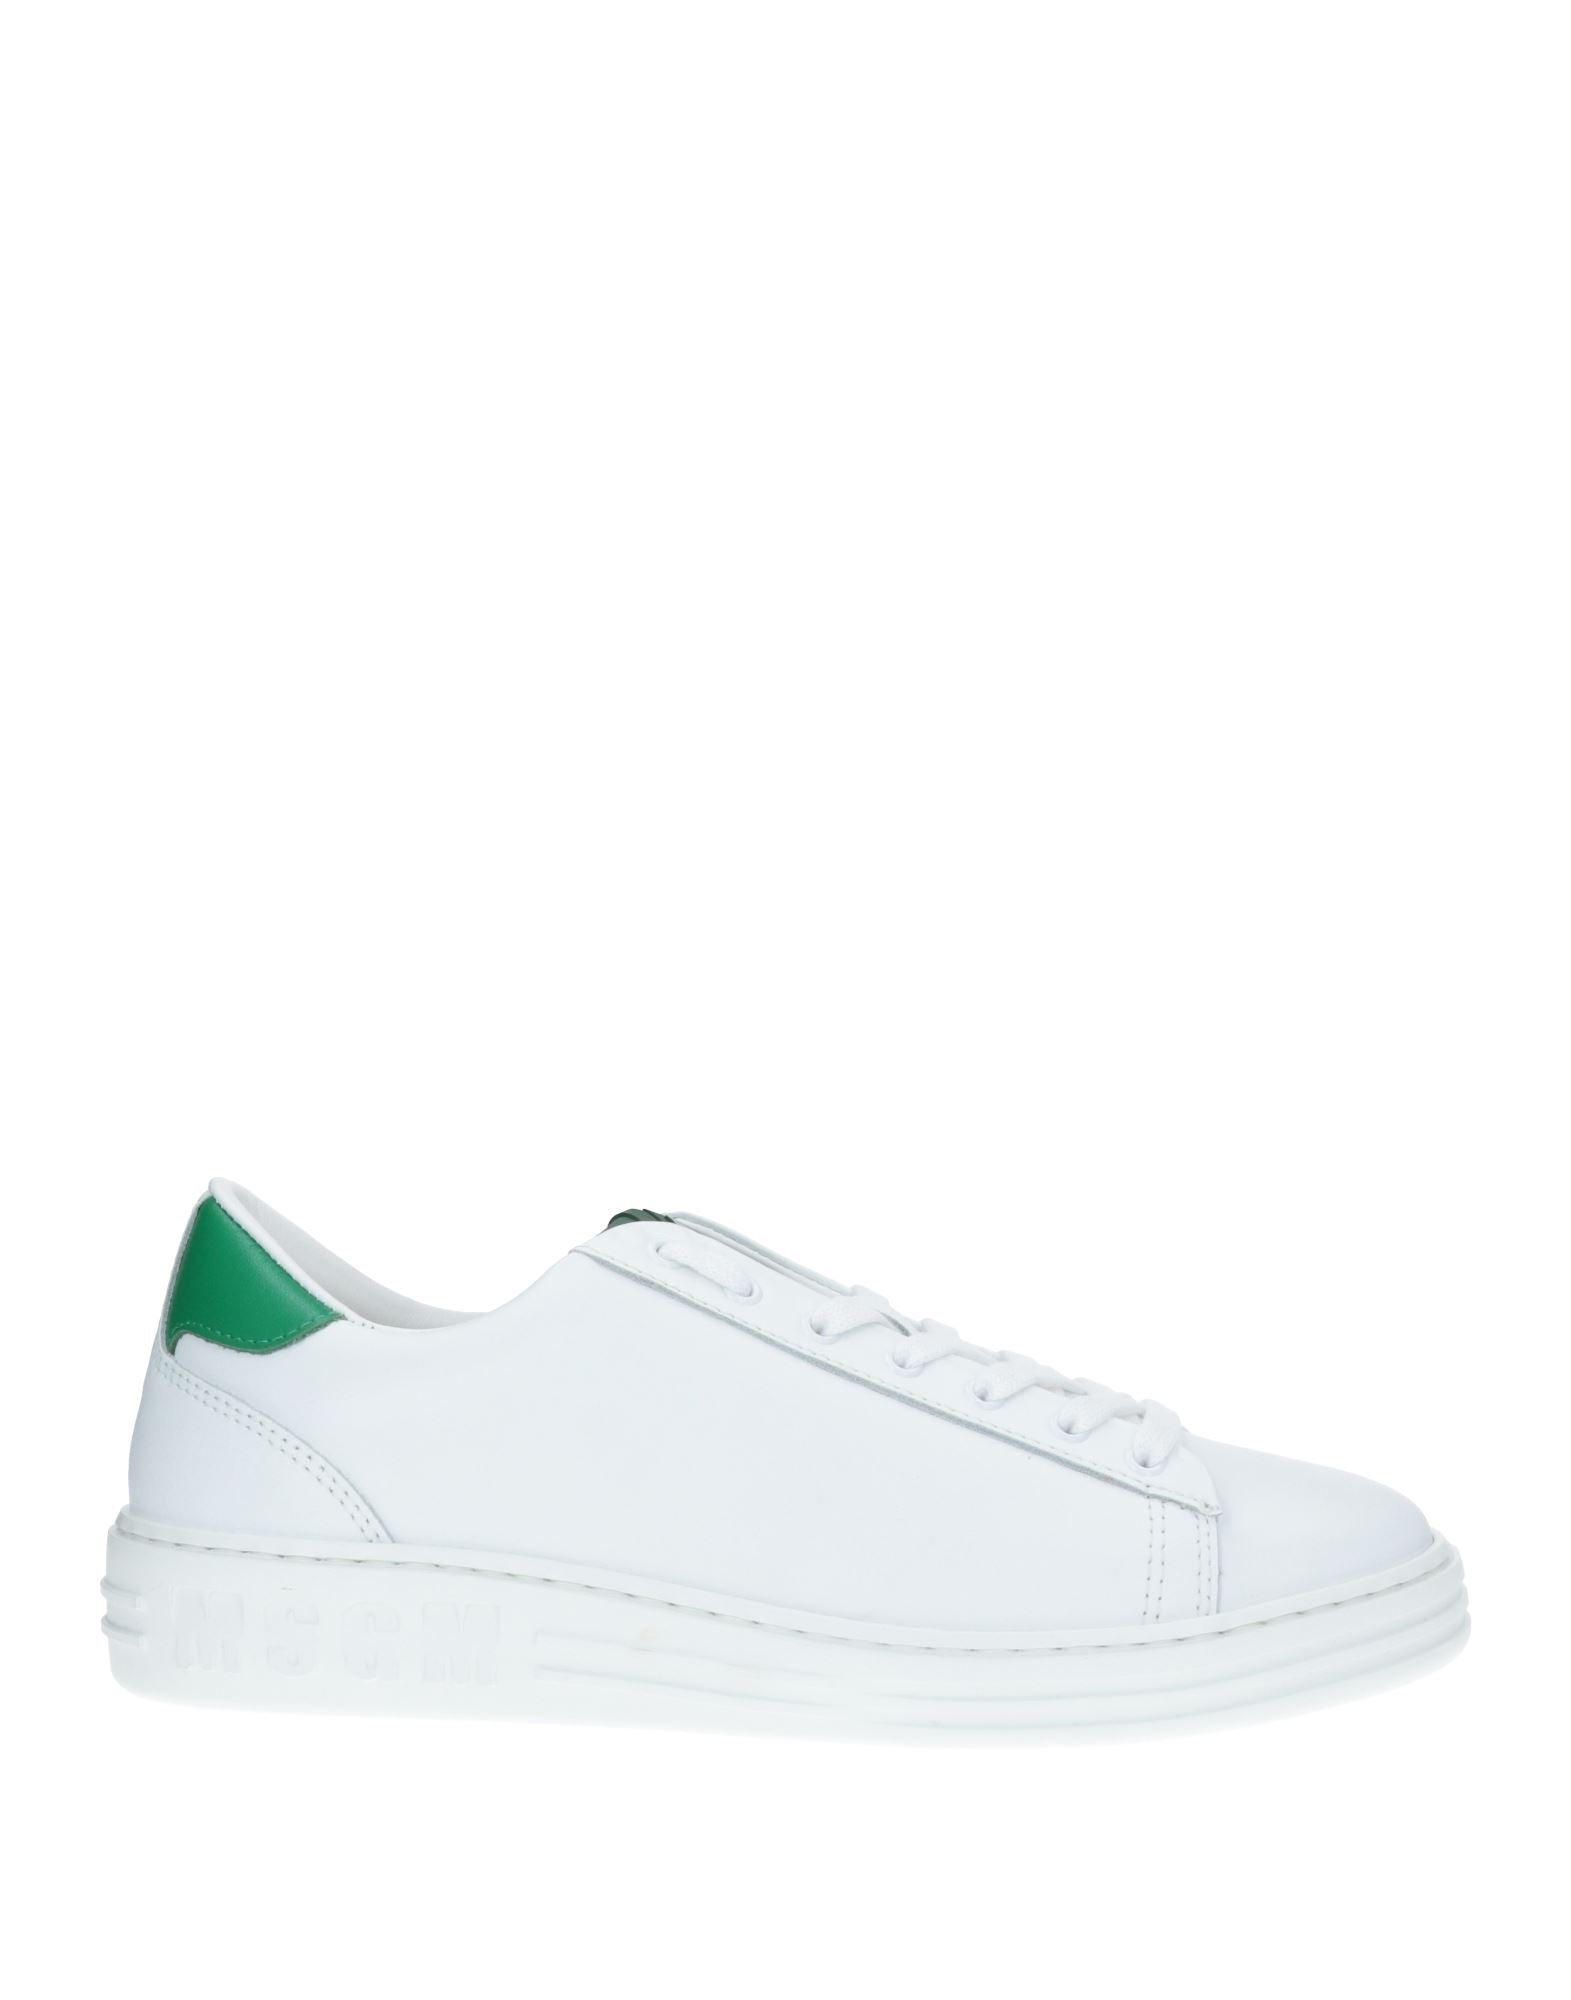 MSGM MSGM MAN SNEAKERS WHITE SIZE 7 SOFT LEATHER